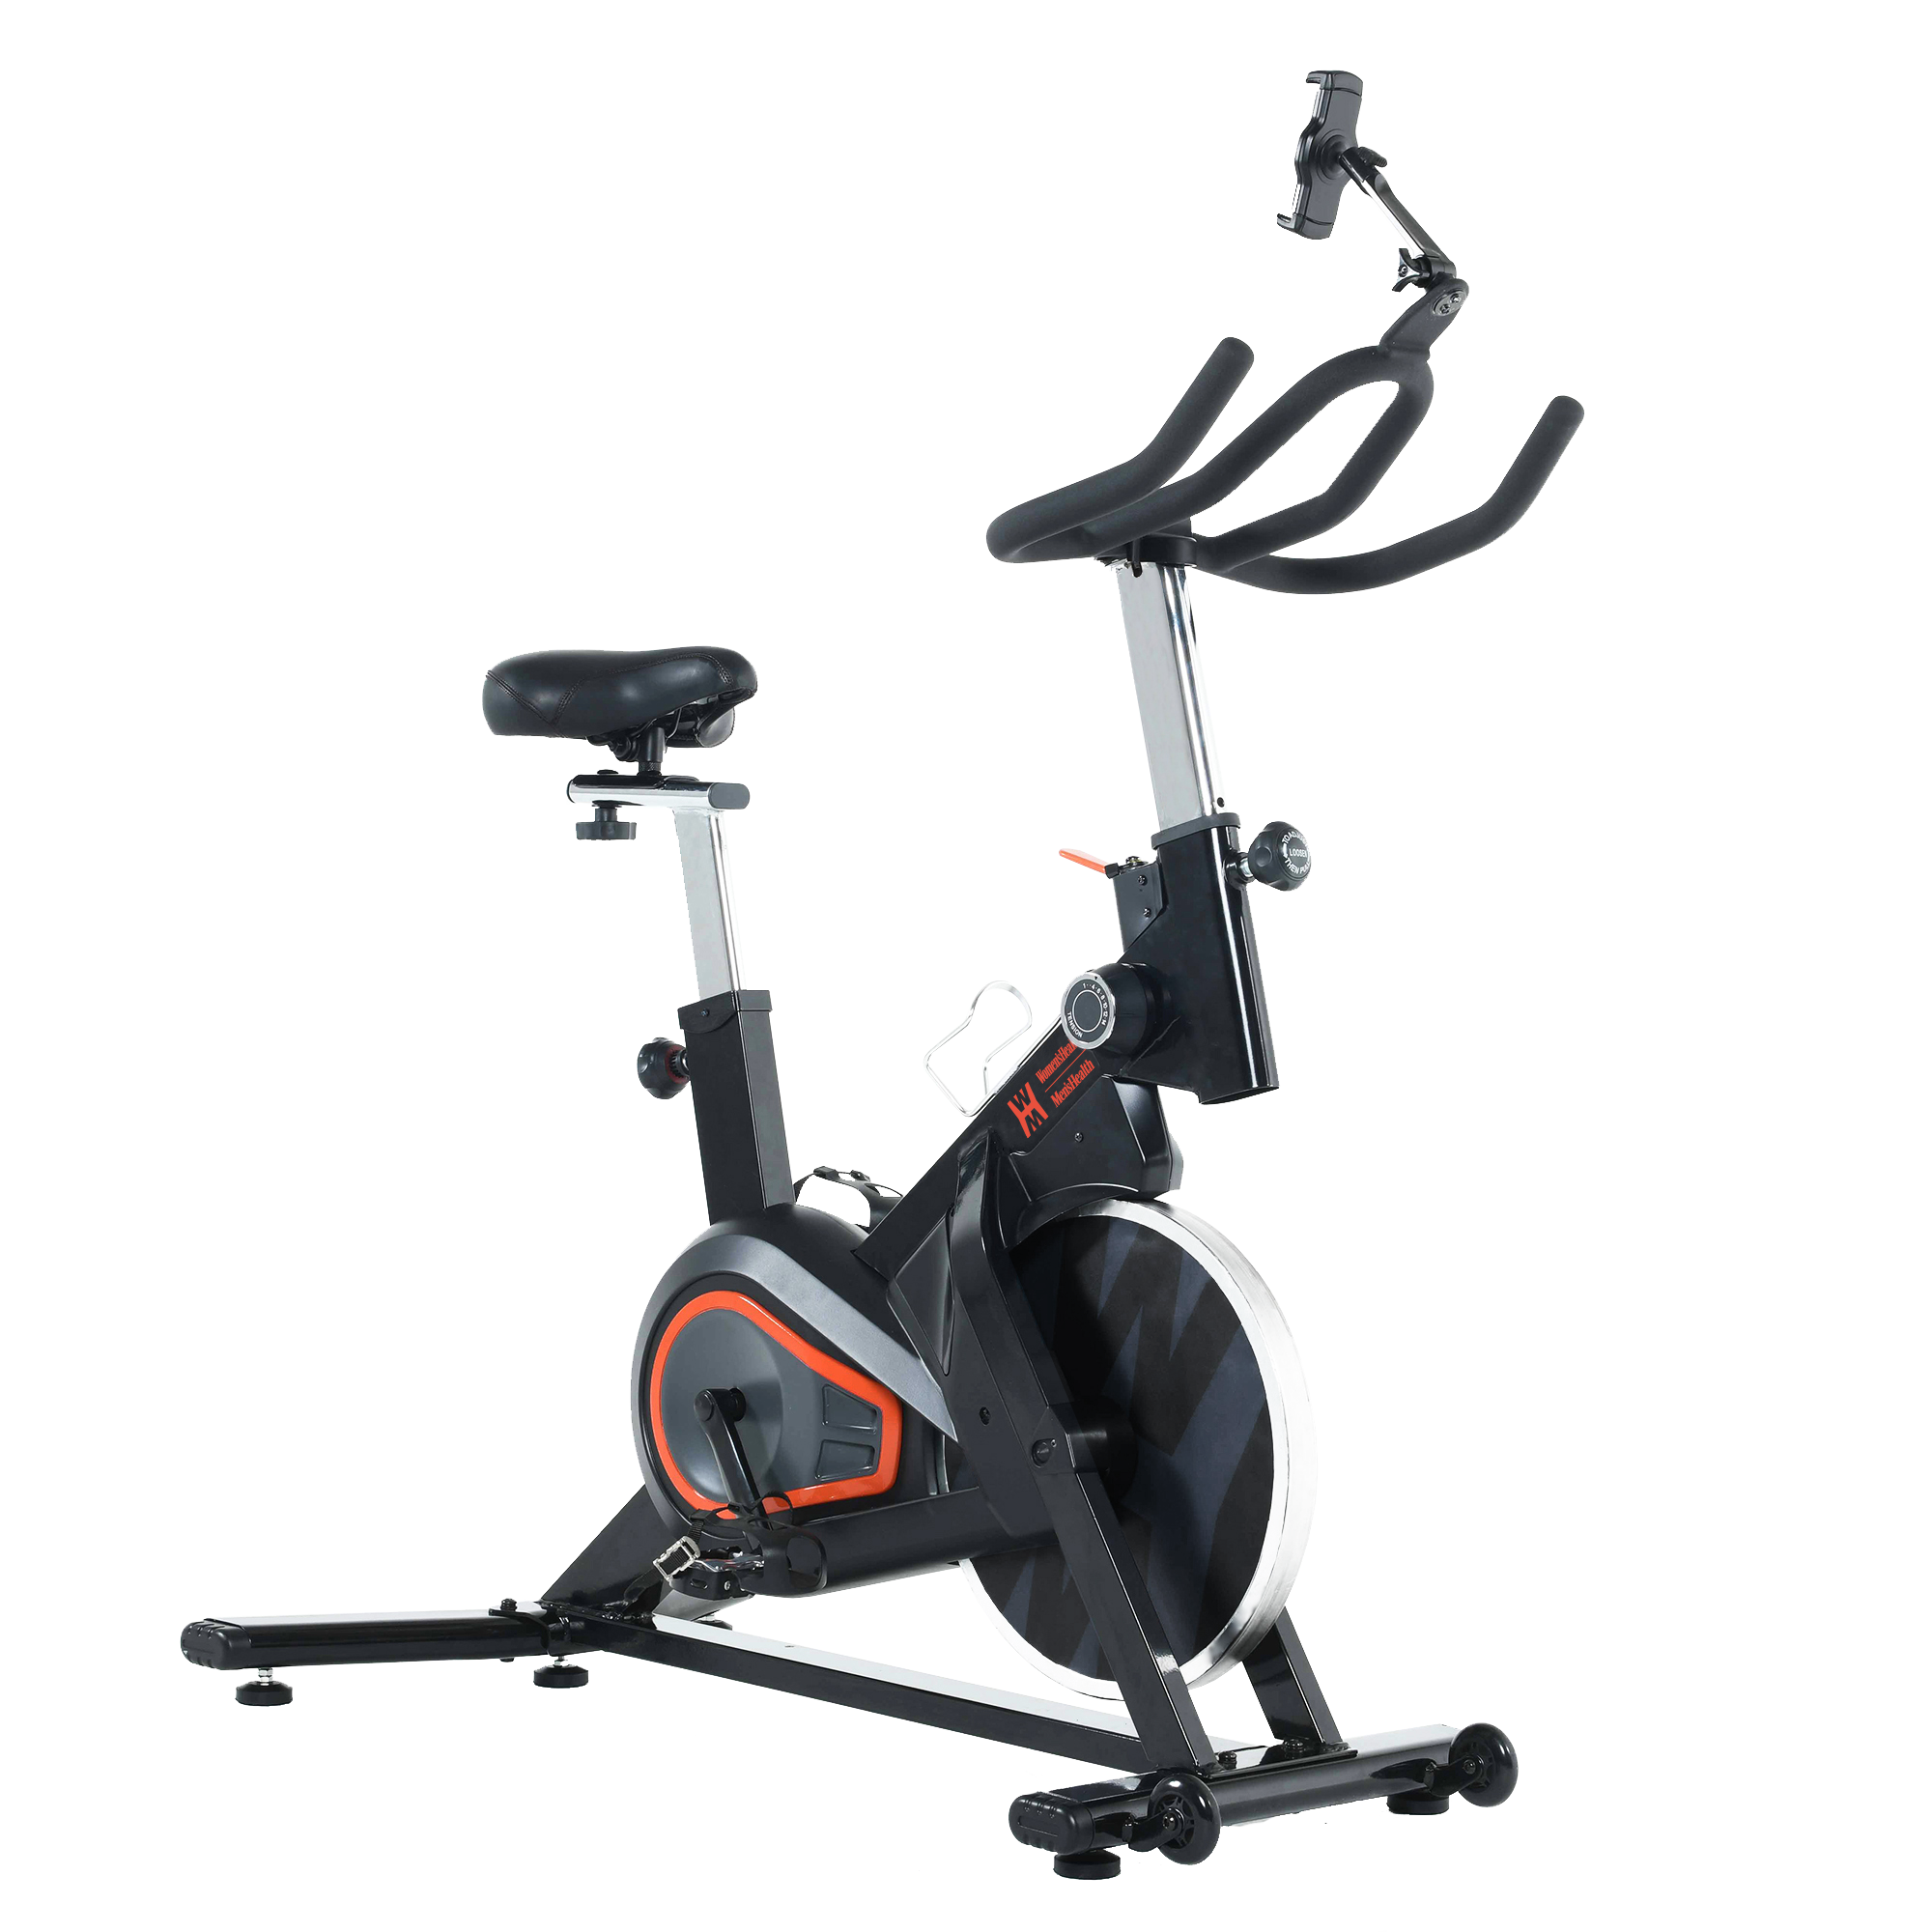 Details about    Indoor Exercise Bike Home Gym Bicycle Cycling Cardio Fitness Training Workout 